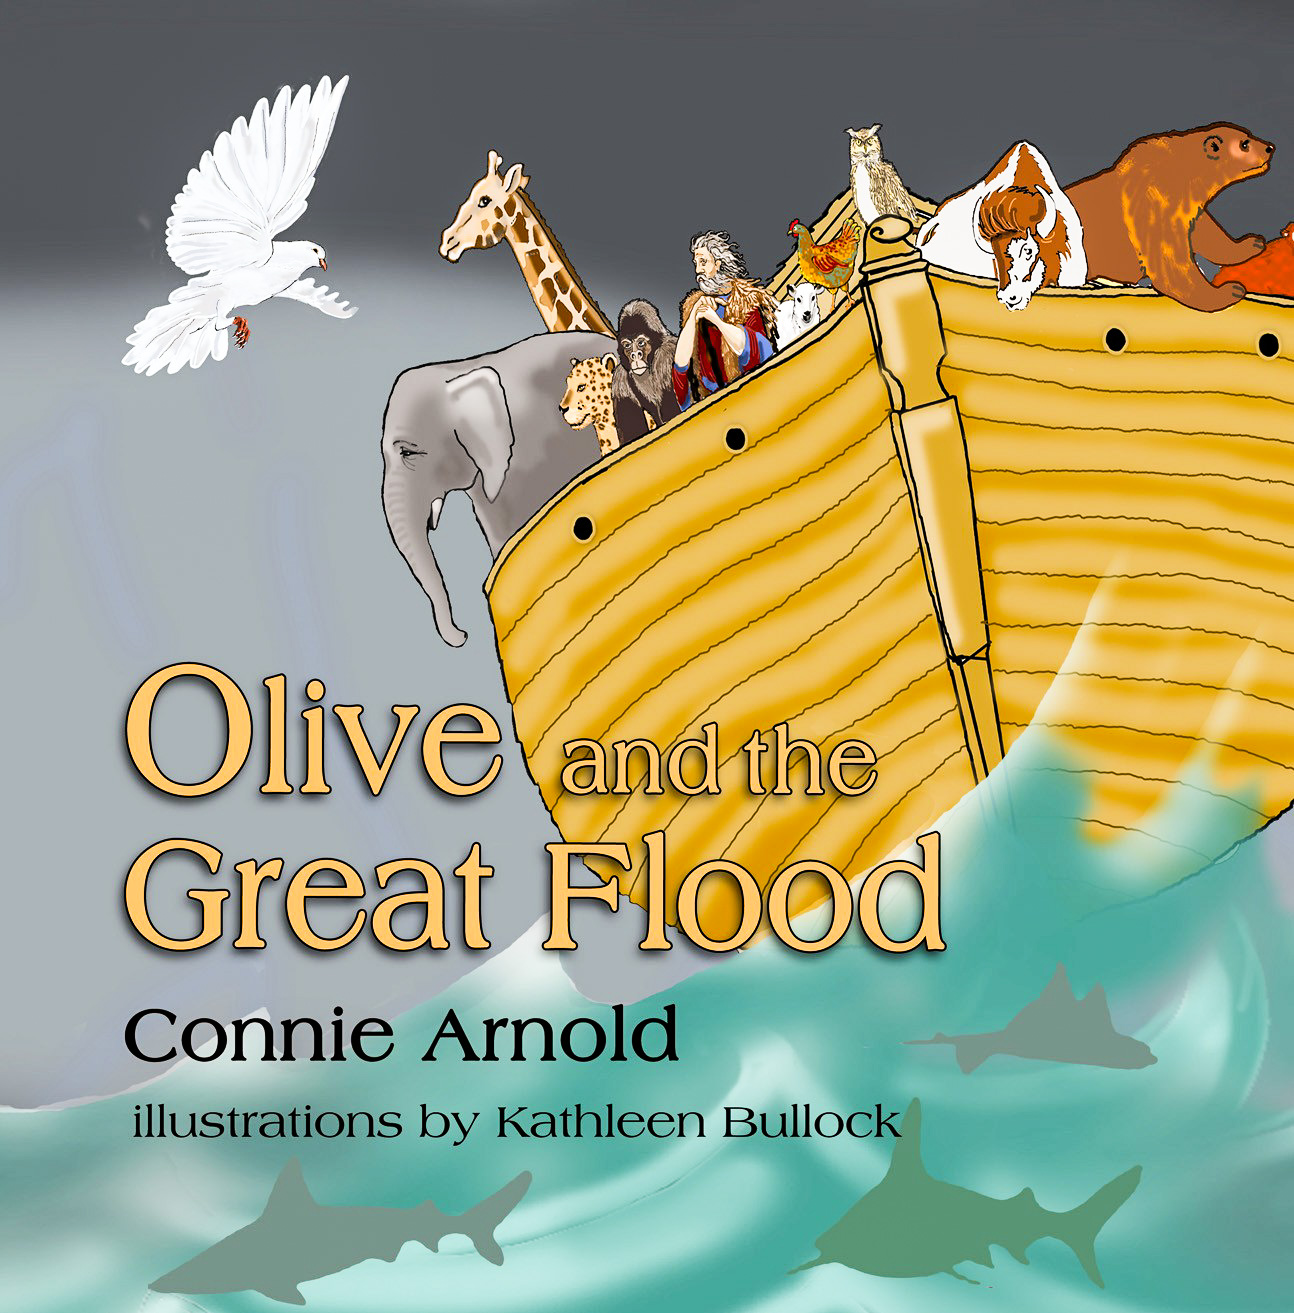 Book Review: Olive and the Great Flood by Connie Arnold